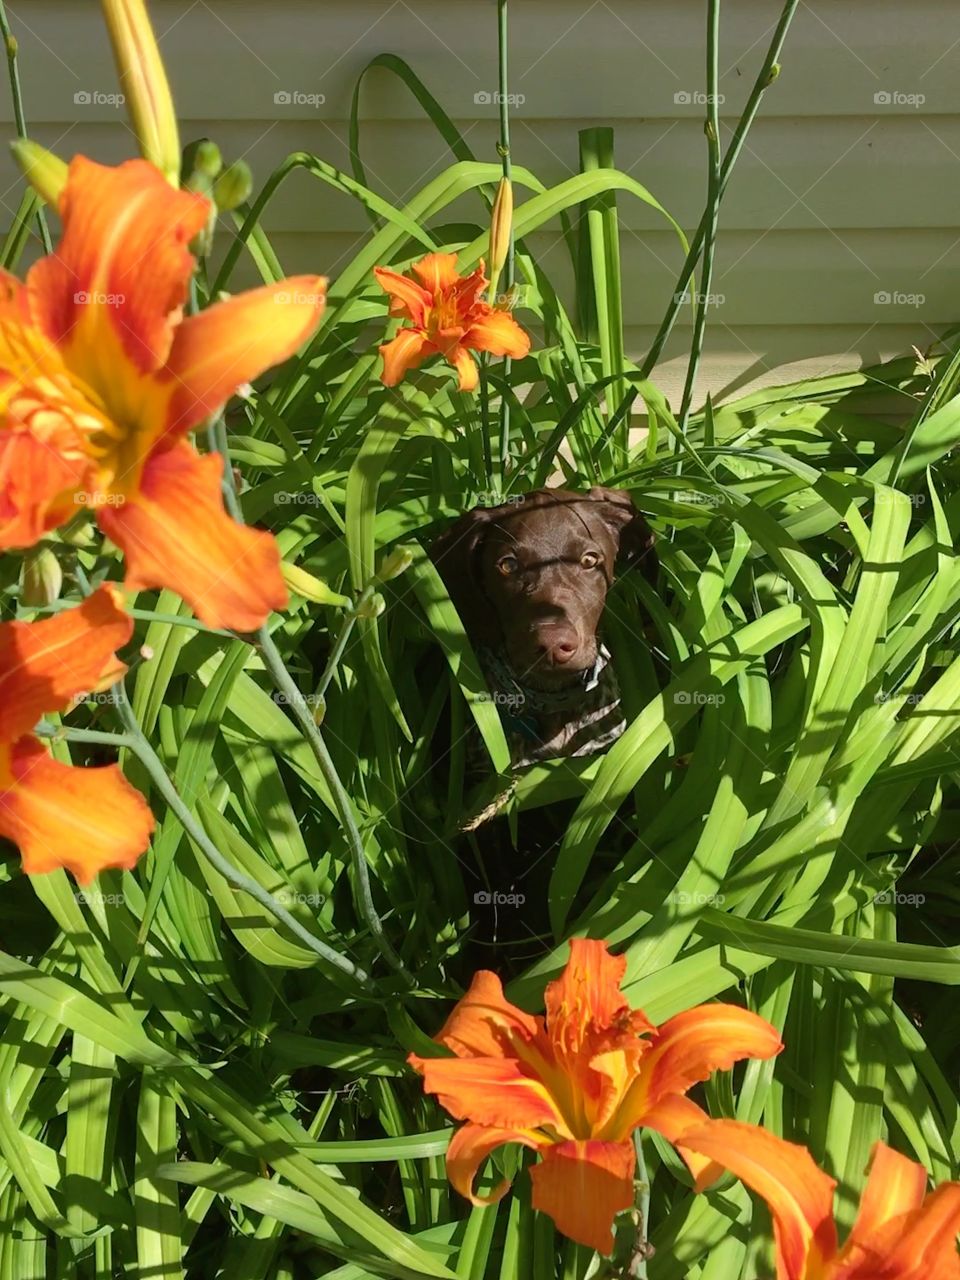 A puppy in floral plant has a huge imagination